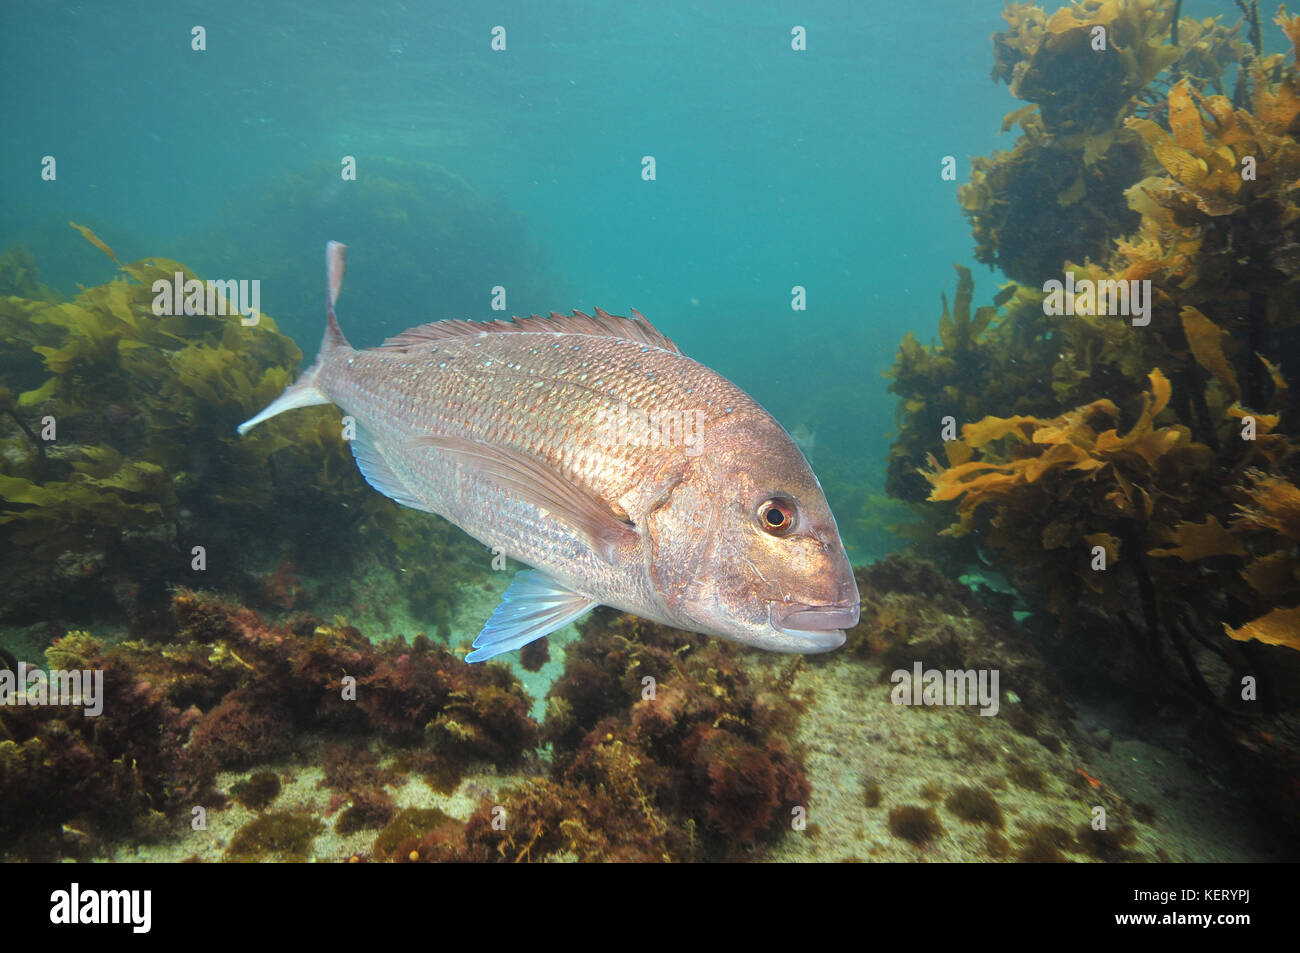 Big Australasian snapper Pagrus auratus turning right in front of camera. Stock Photo